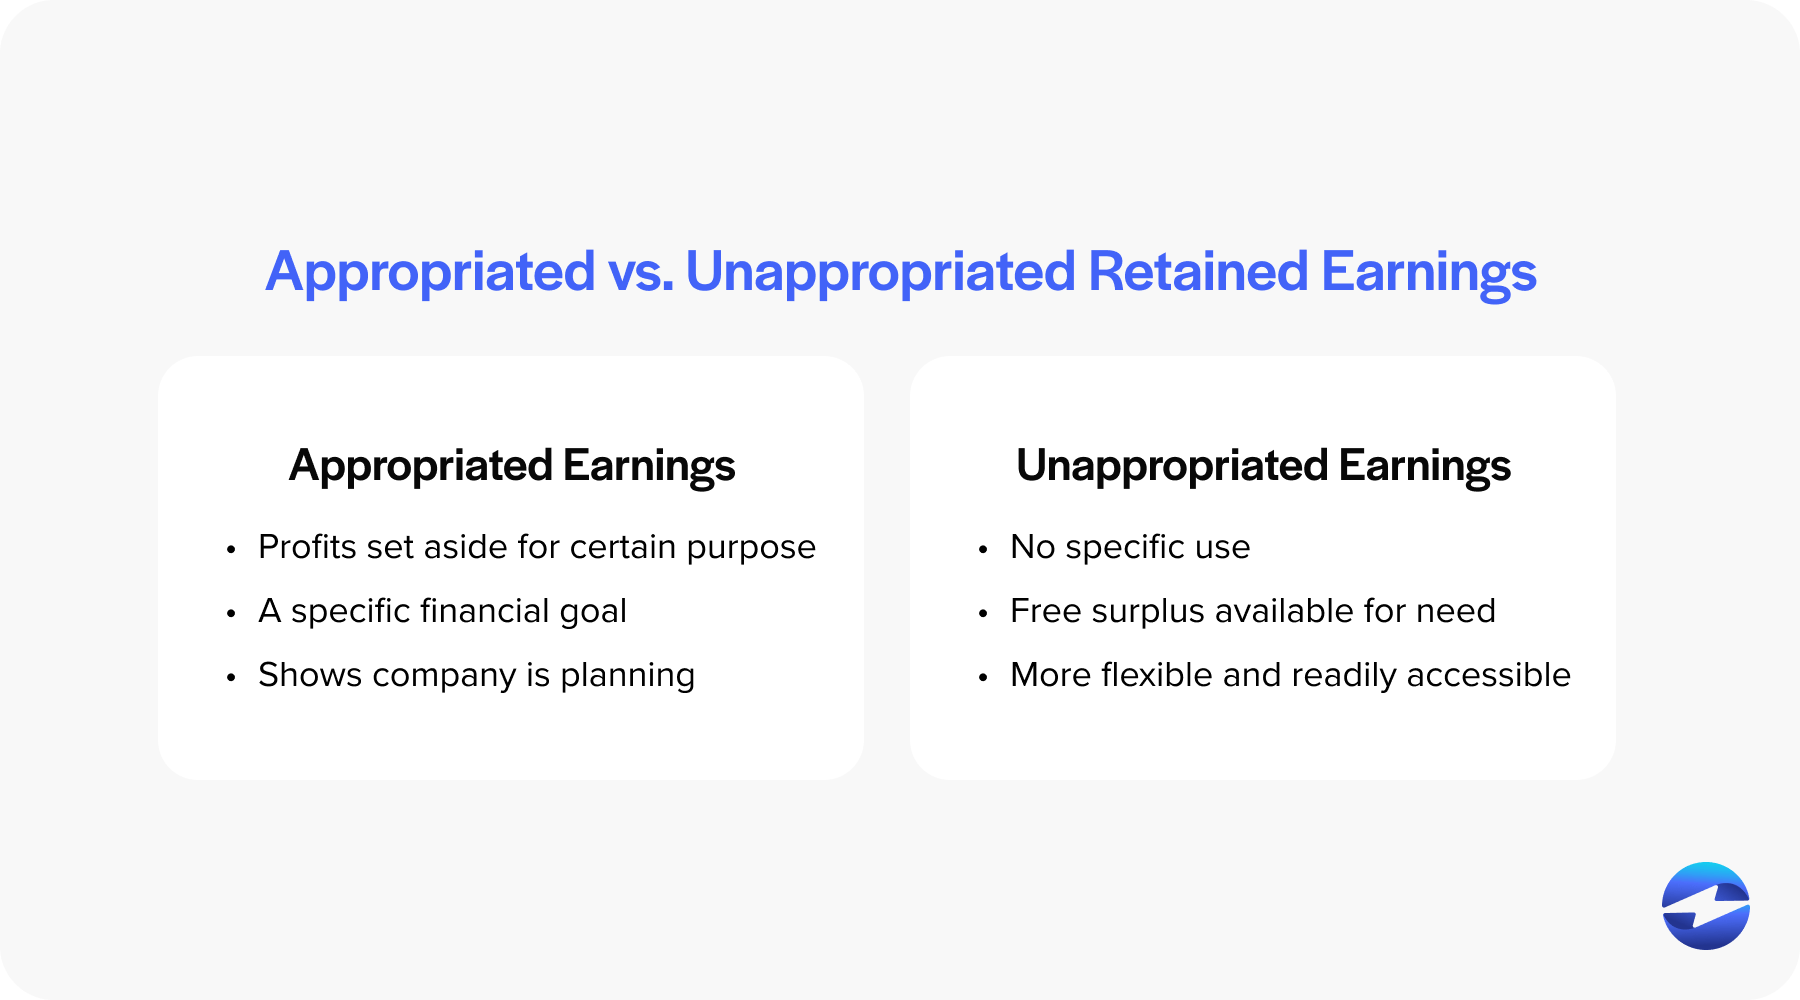 appropriated vs unappropriated retained earnings